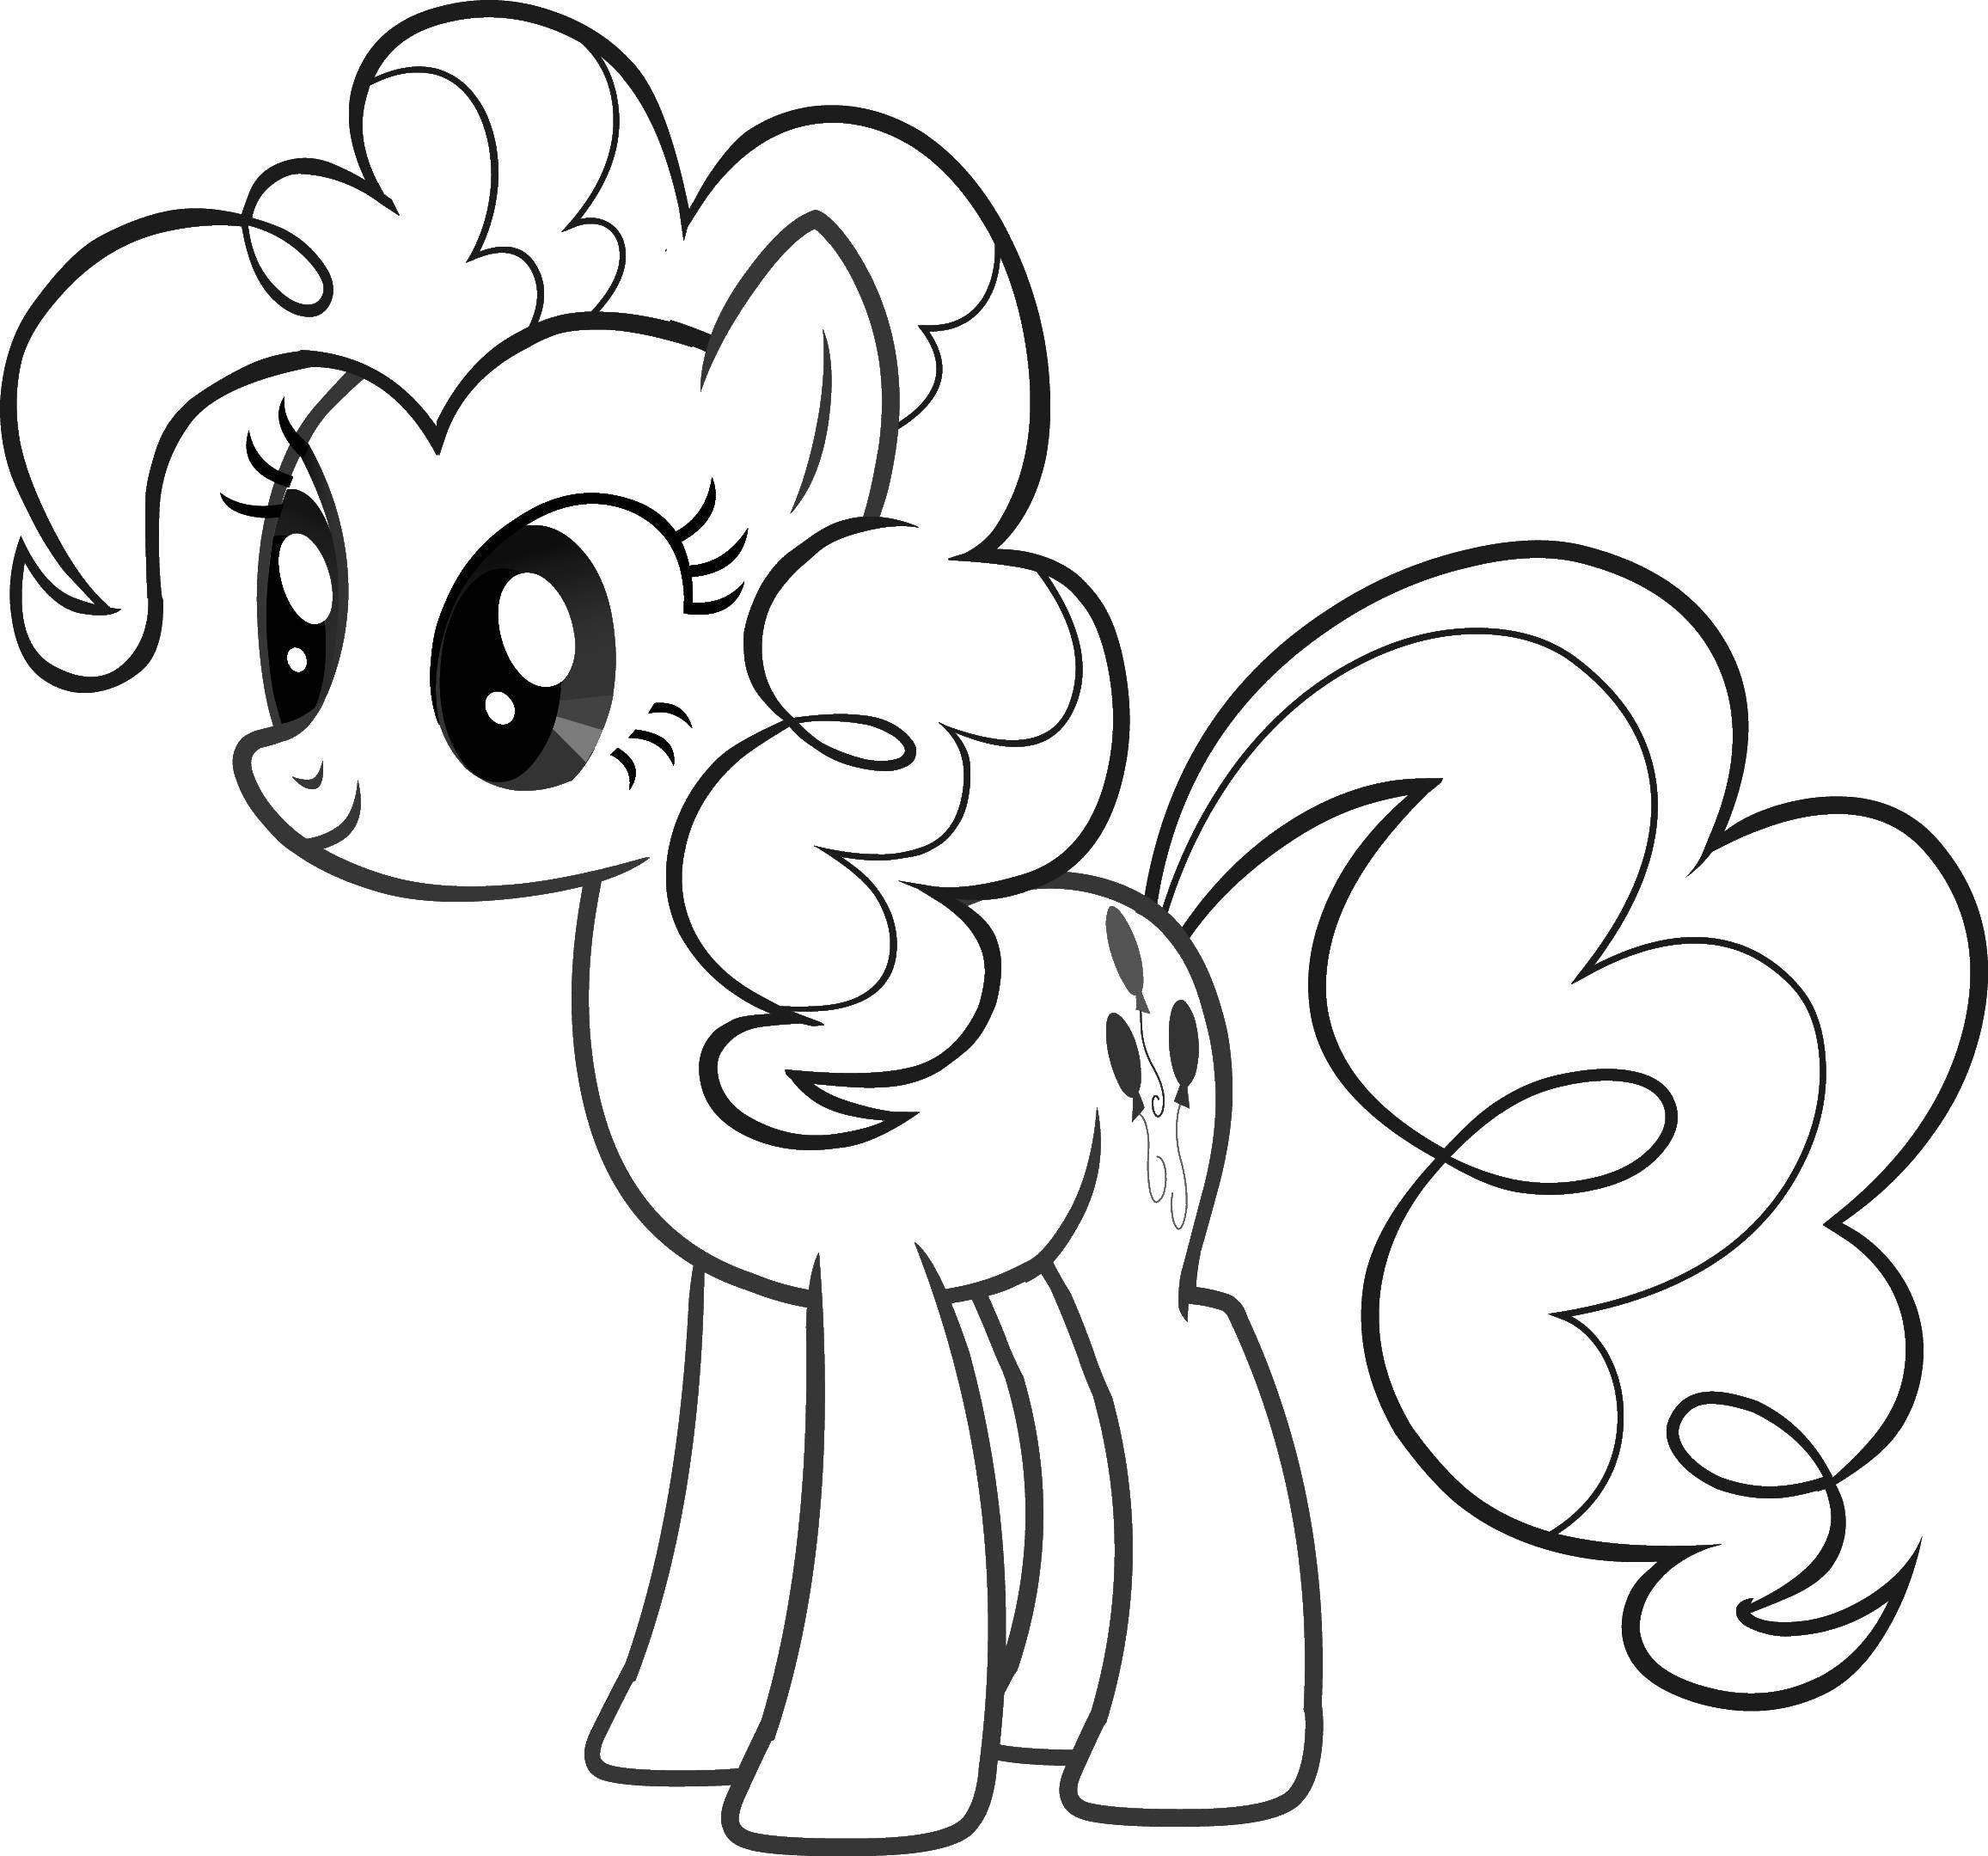 Coloring Pinkie pie. Category Coloring pages for kids. Tags:  Pinkie pie, my little pony.